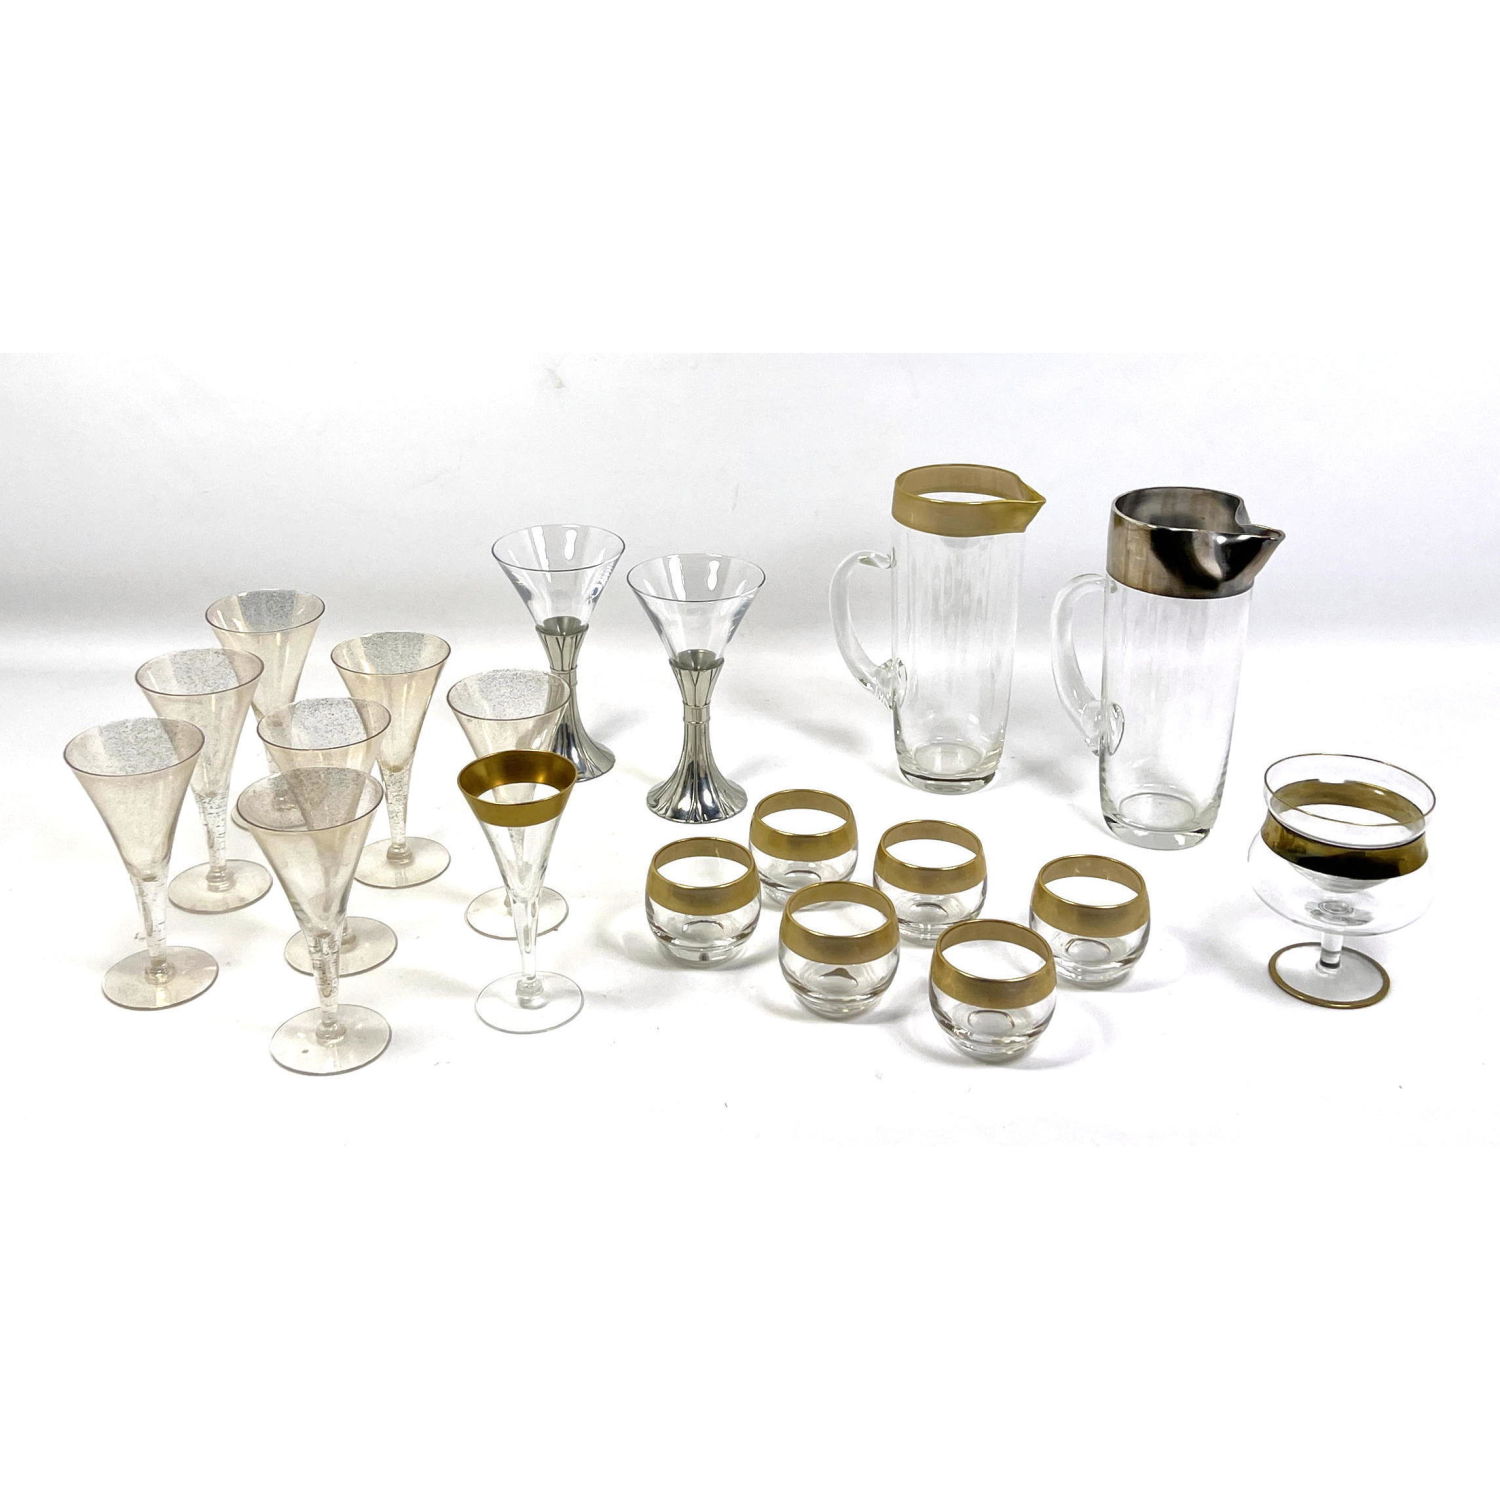 Stemware. Gold and Silver rim. pewter